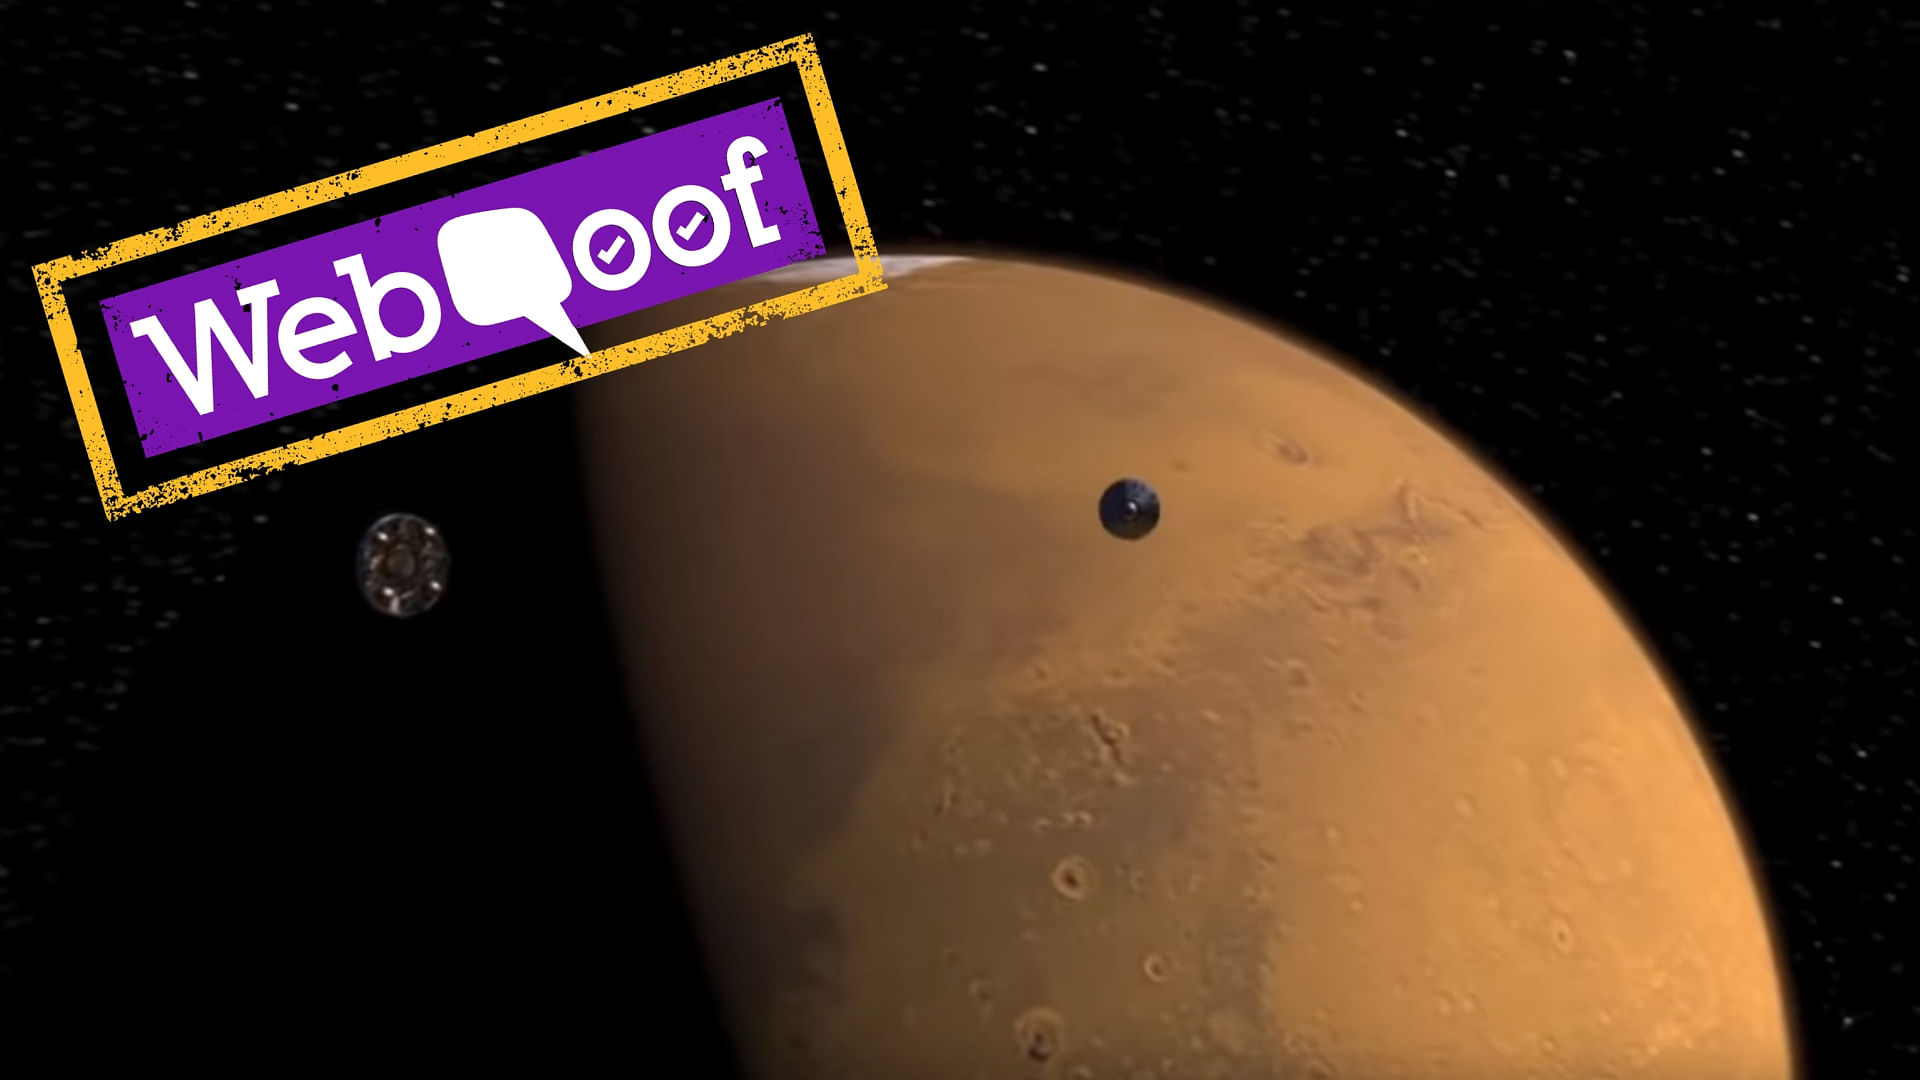 An animated video purportedly showing ISRO’s Mangalyaan landing on Mars has gone viral on social media.